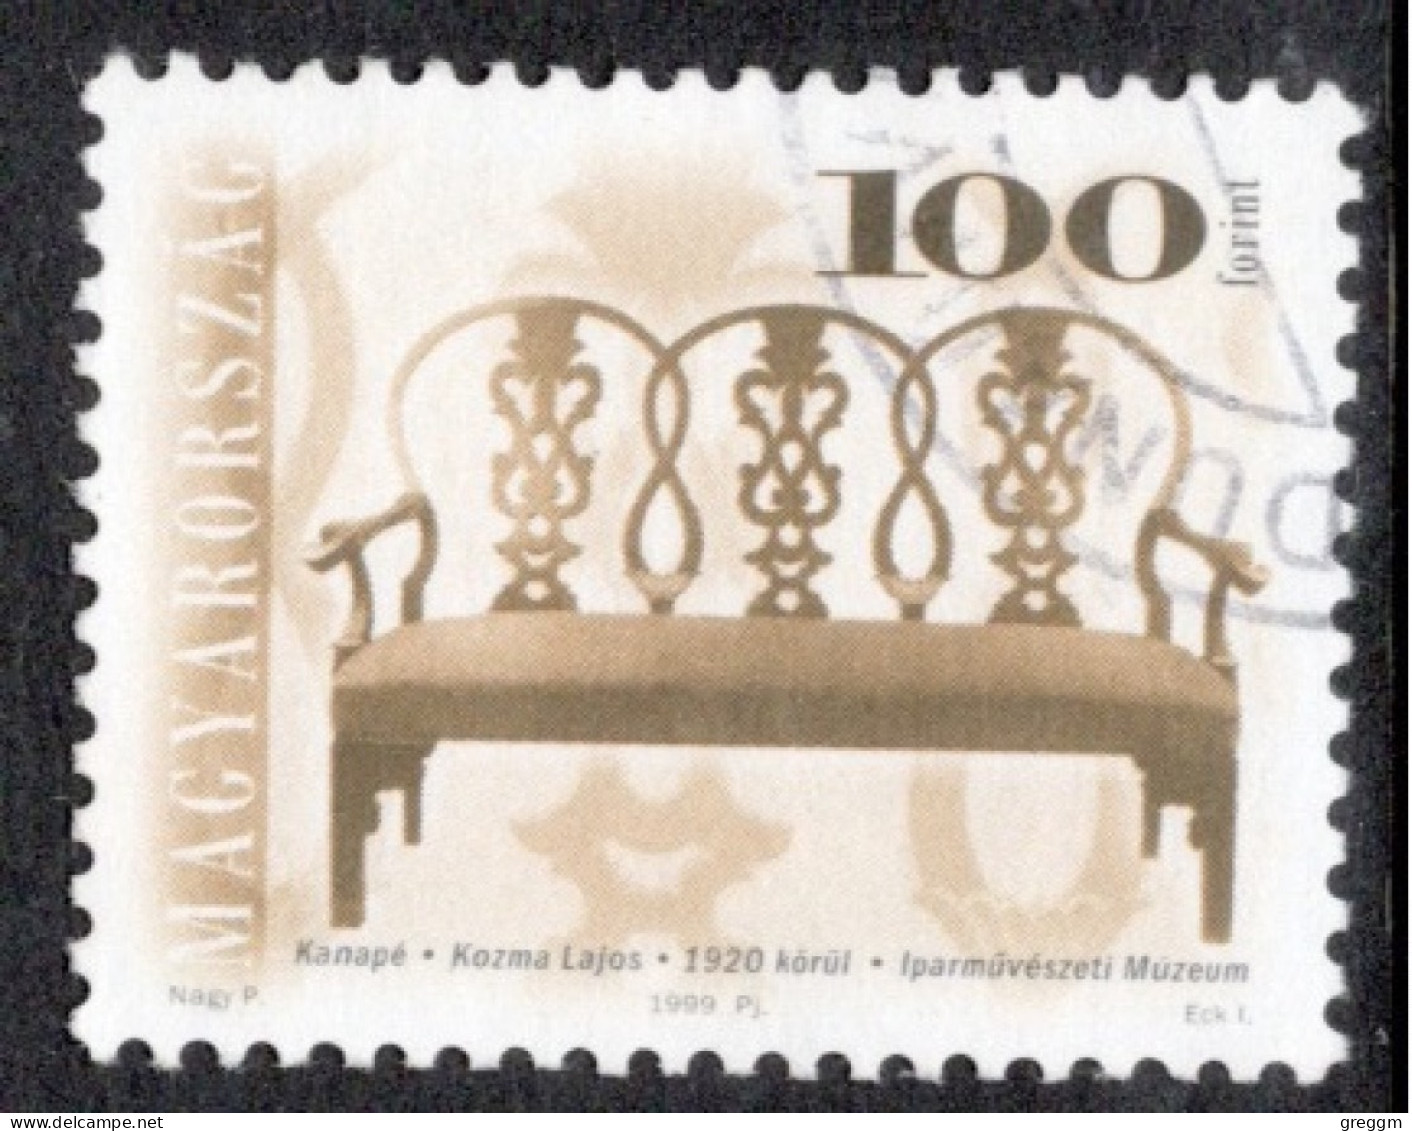 Hungary 1999  Single Stamp Celebrating Furniture In Fine Used - Gebraucht